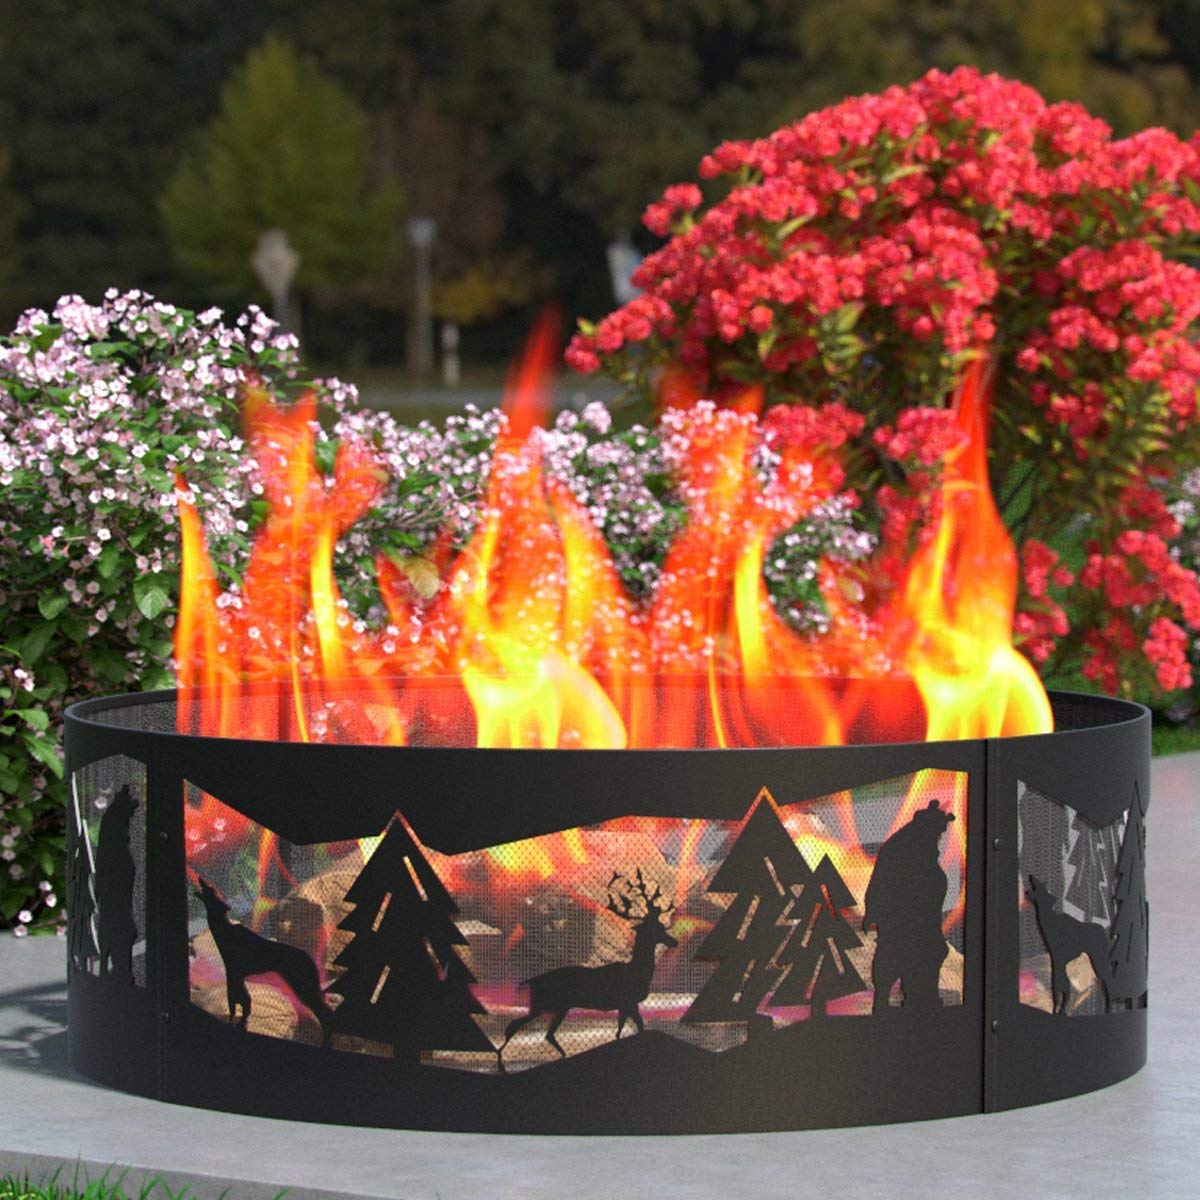 Regal Flame 8 ft Deluxe Heavy Duty Firewood Log Rack for Fireplaces and Fire Pits to Enjoy a Real Fire or Complement Vent-Free